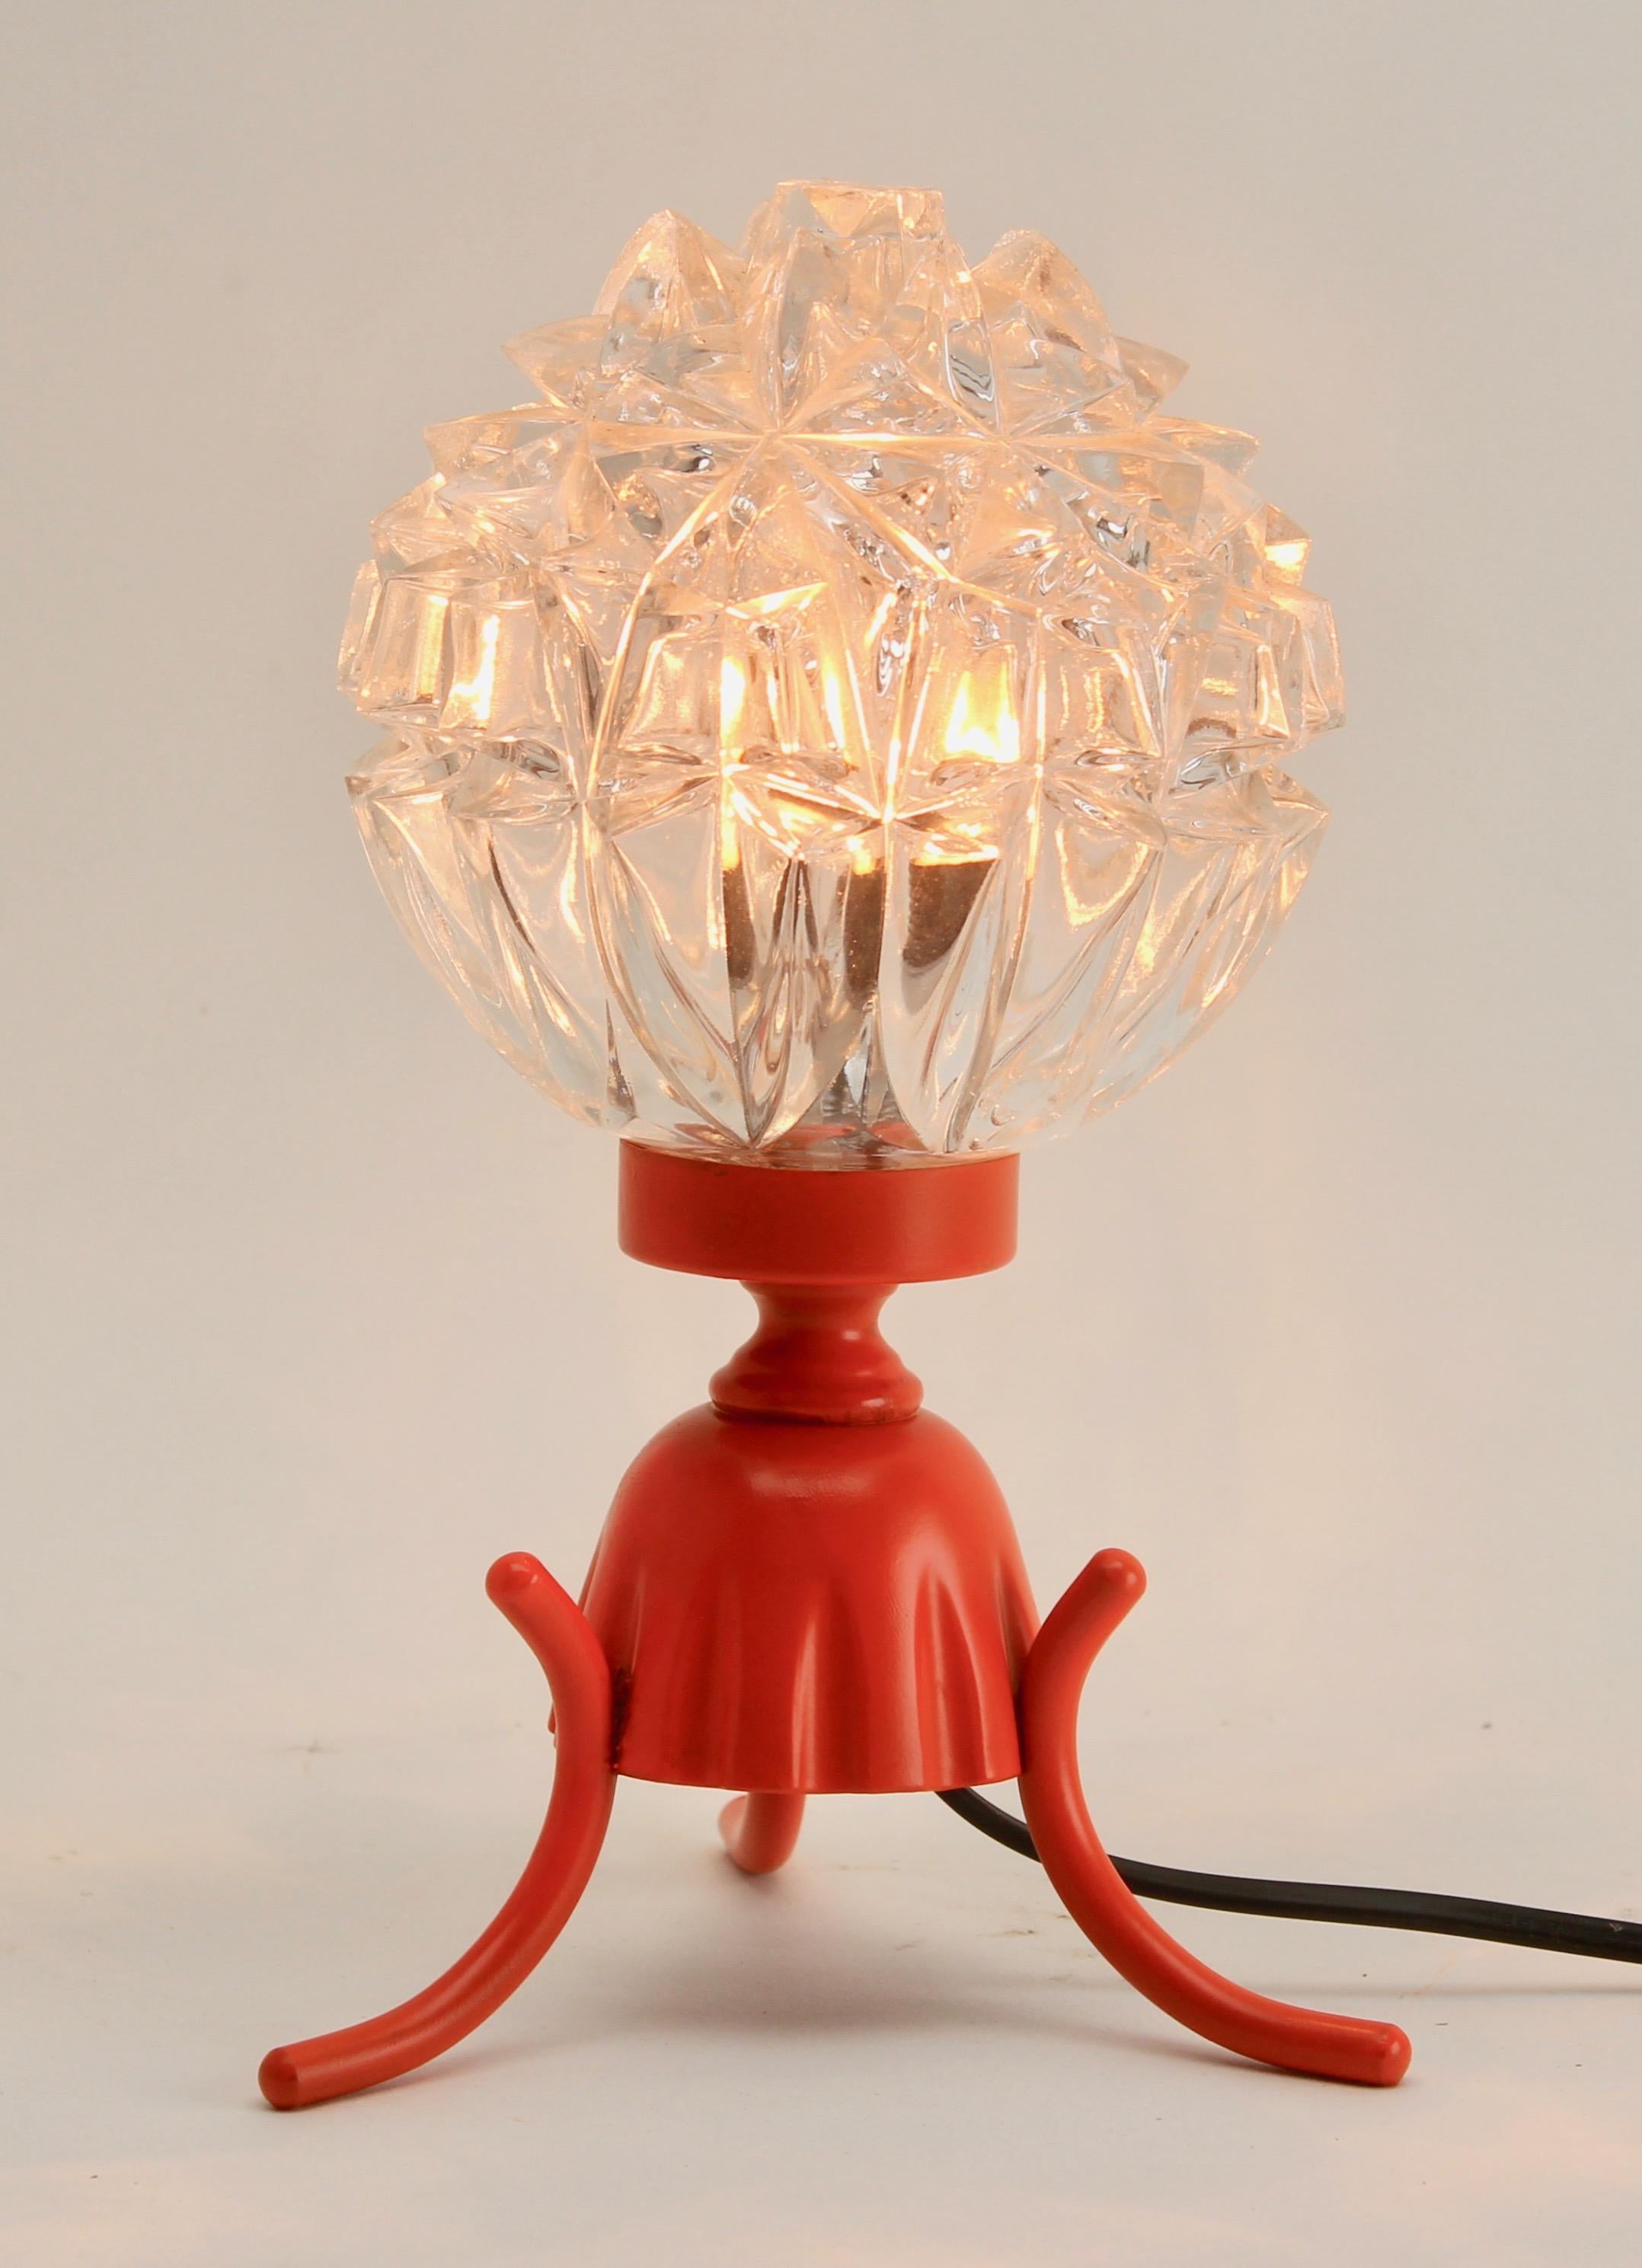 A simple Minimalist base enameled with bright tangerine, to hold a heavy pressed-glass shade that scatters dappled light next to your pillow.
Vintage elements with restored enamel, renovated wiring and fittings.
Electrical lamp fitting E14.

Please